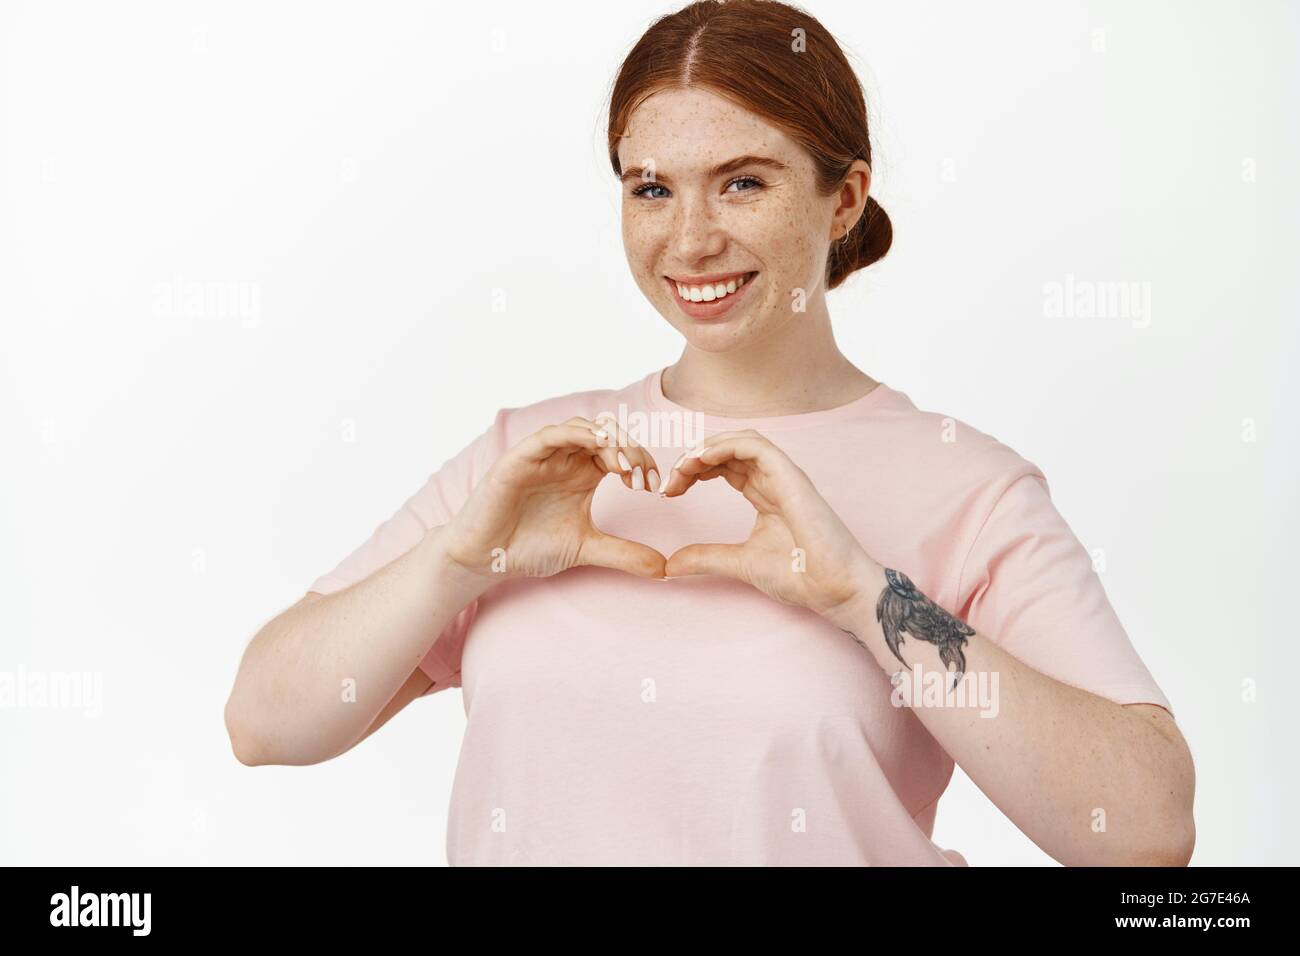 In love. Young smiling redhead female shows heart sign and looks happy, like something, express affection or sympathy, standing in tshirt against Stock Photo